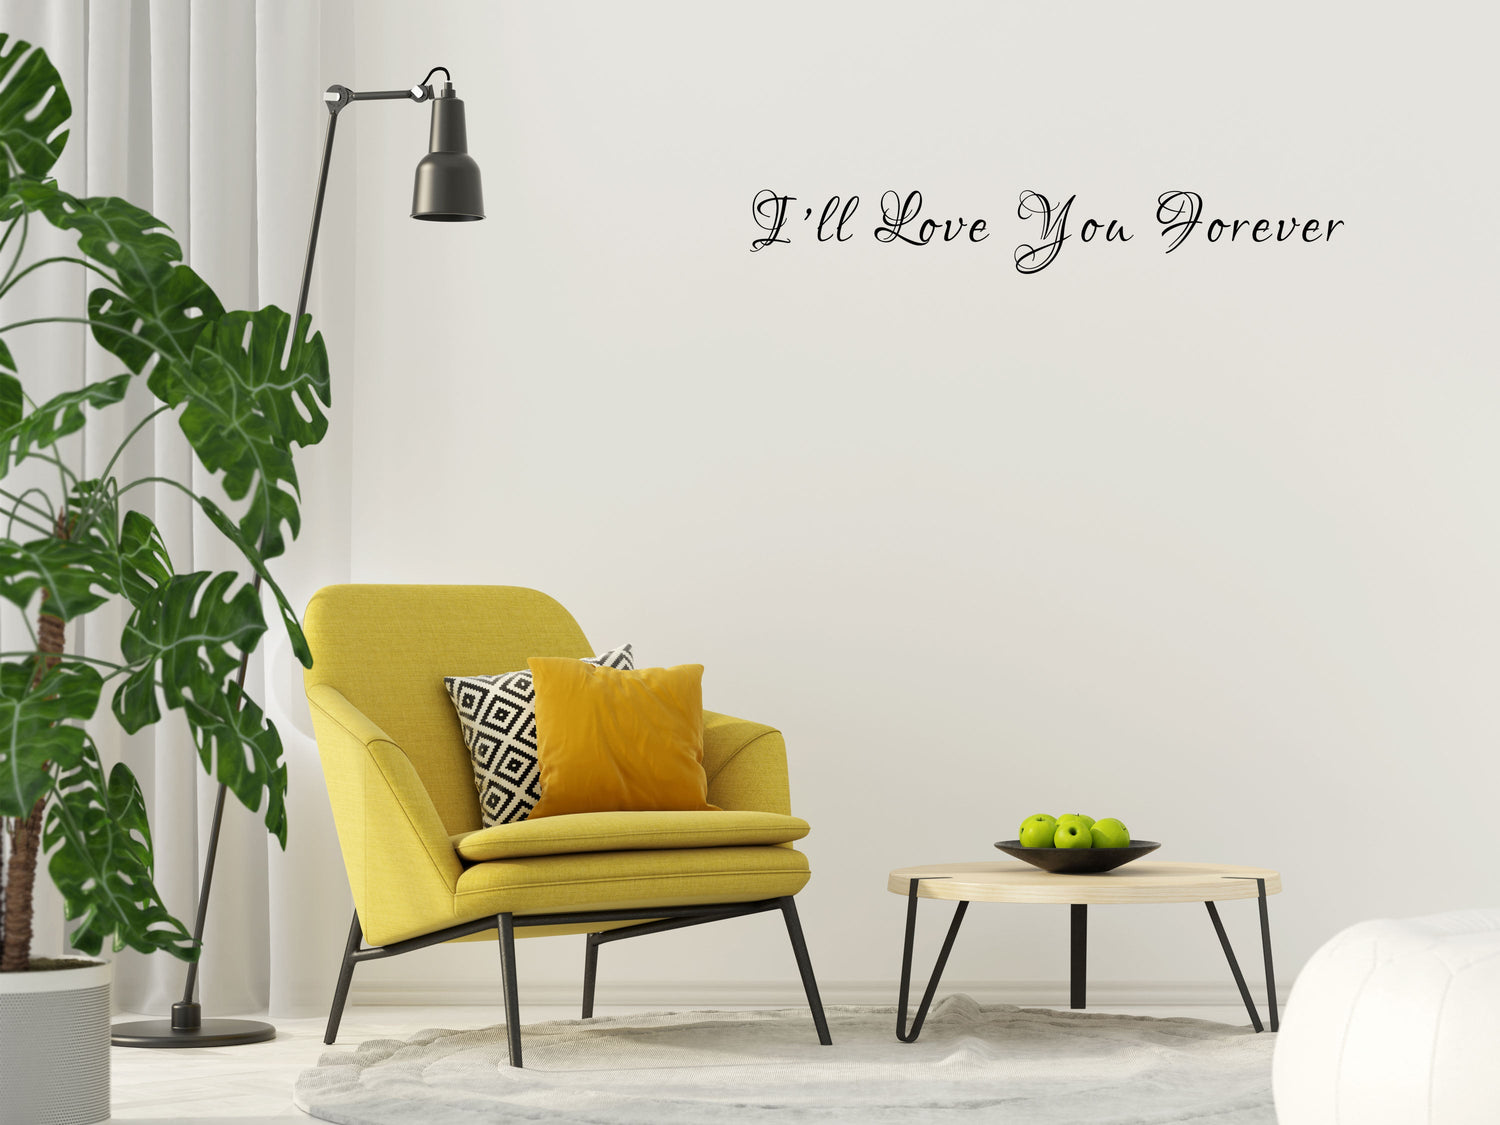 I'll Love You Forever Vinyl Wall Decal Inspirational Wall Signs 